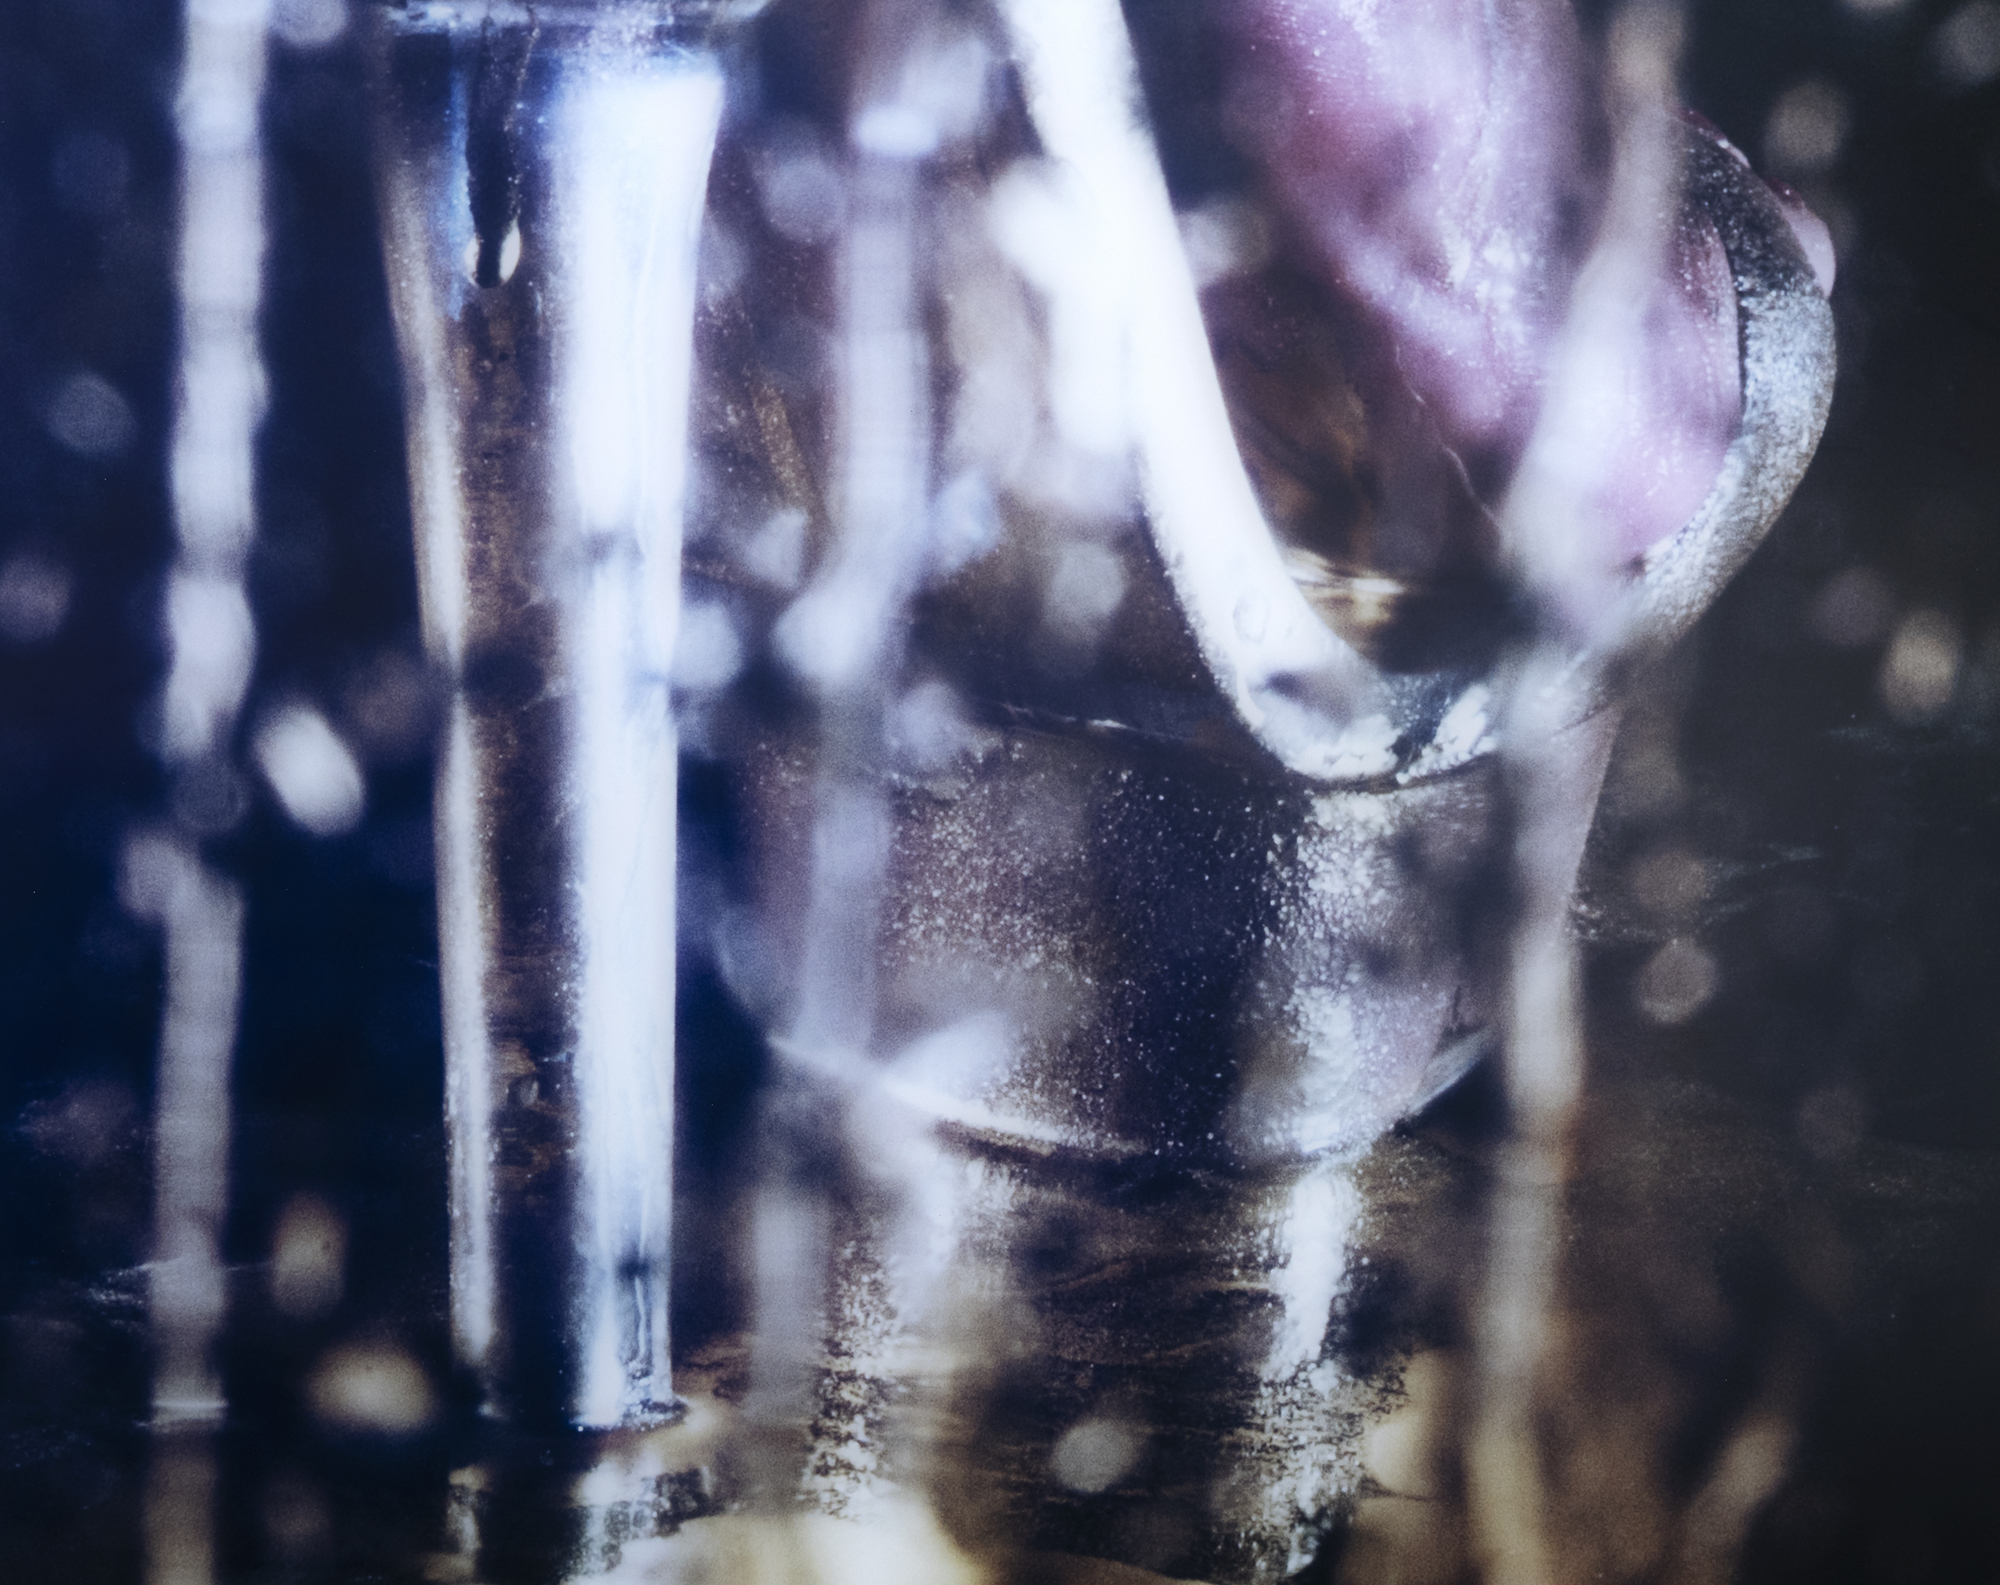 MARILYN MINTER - After Hours - chromogenic print - 85 1/2 x 55 3/4 in.